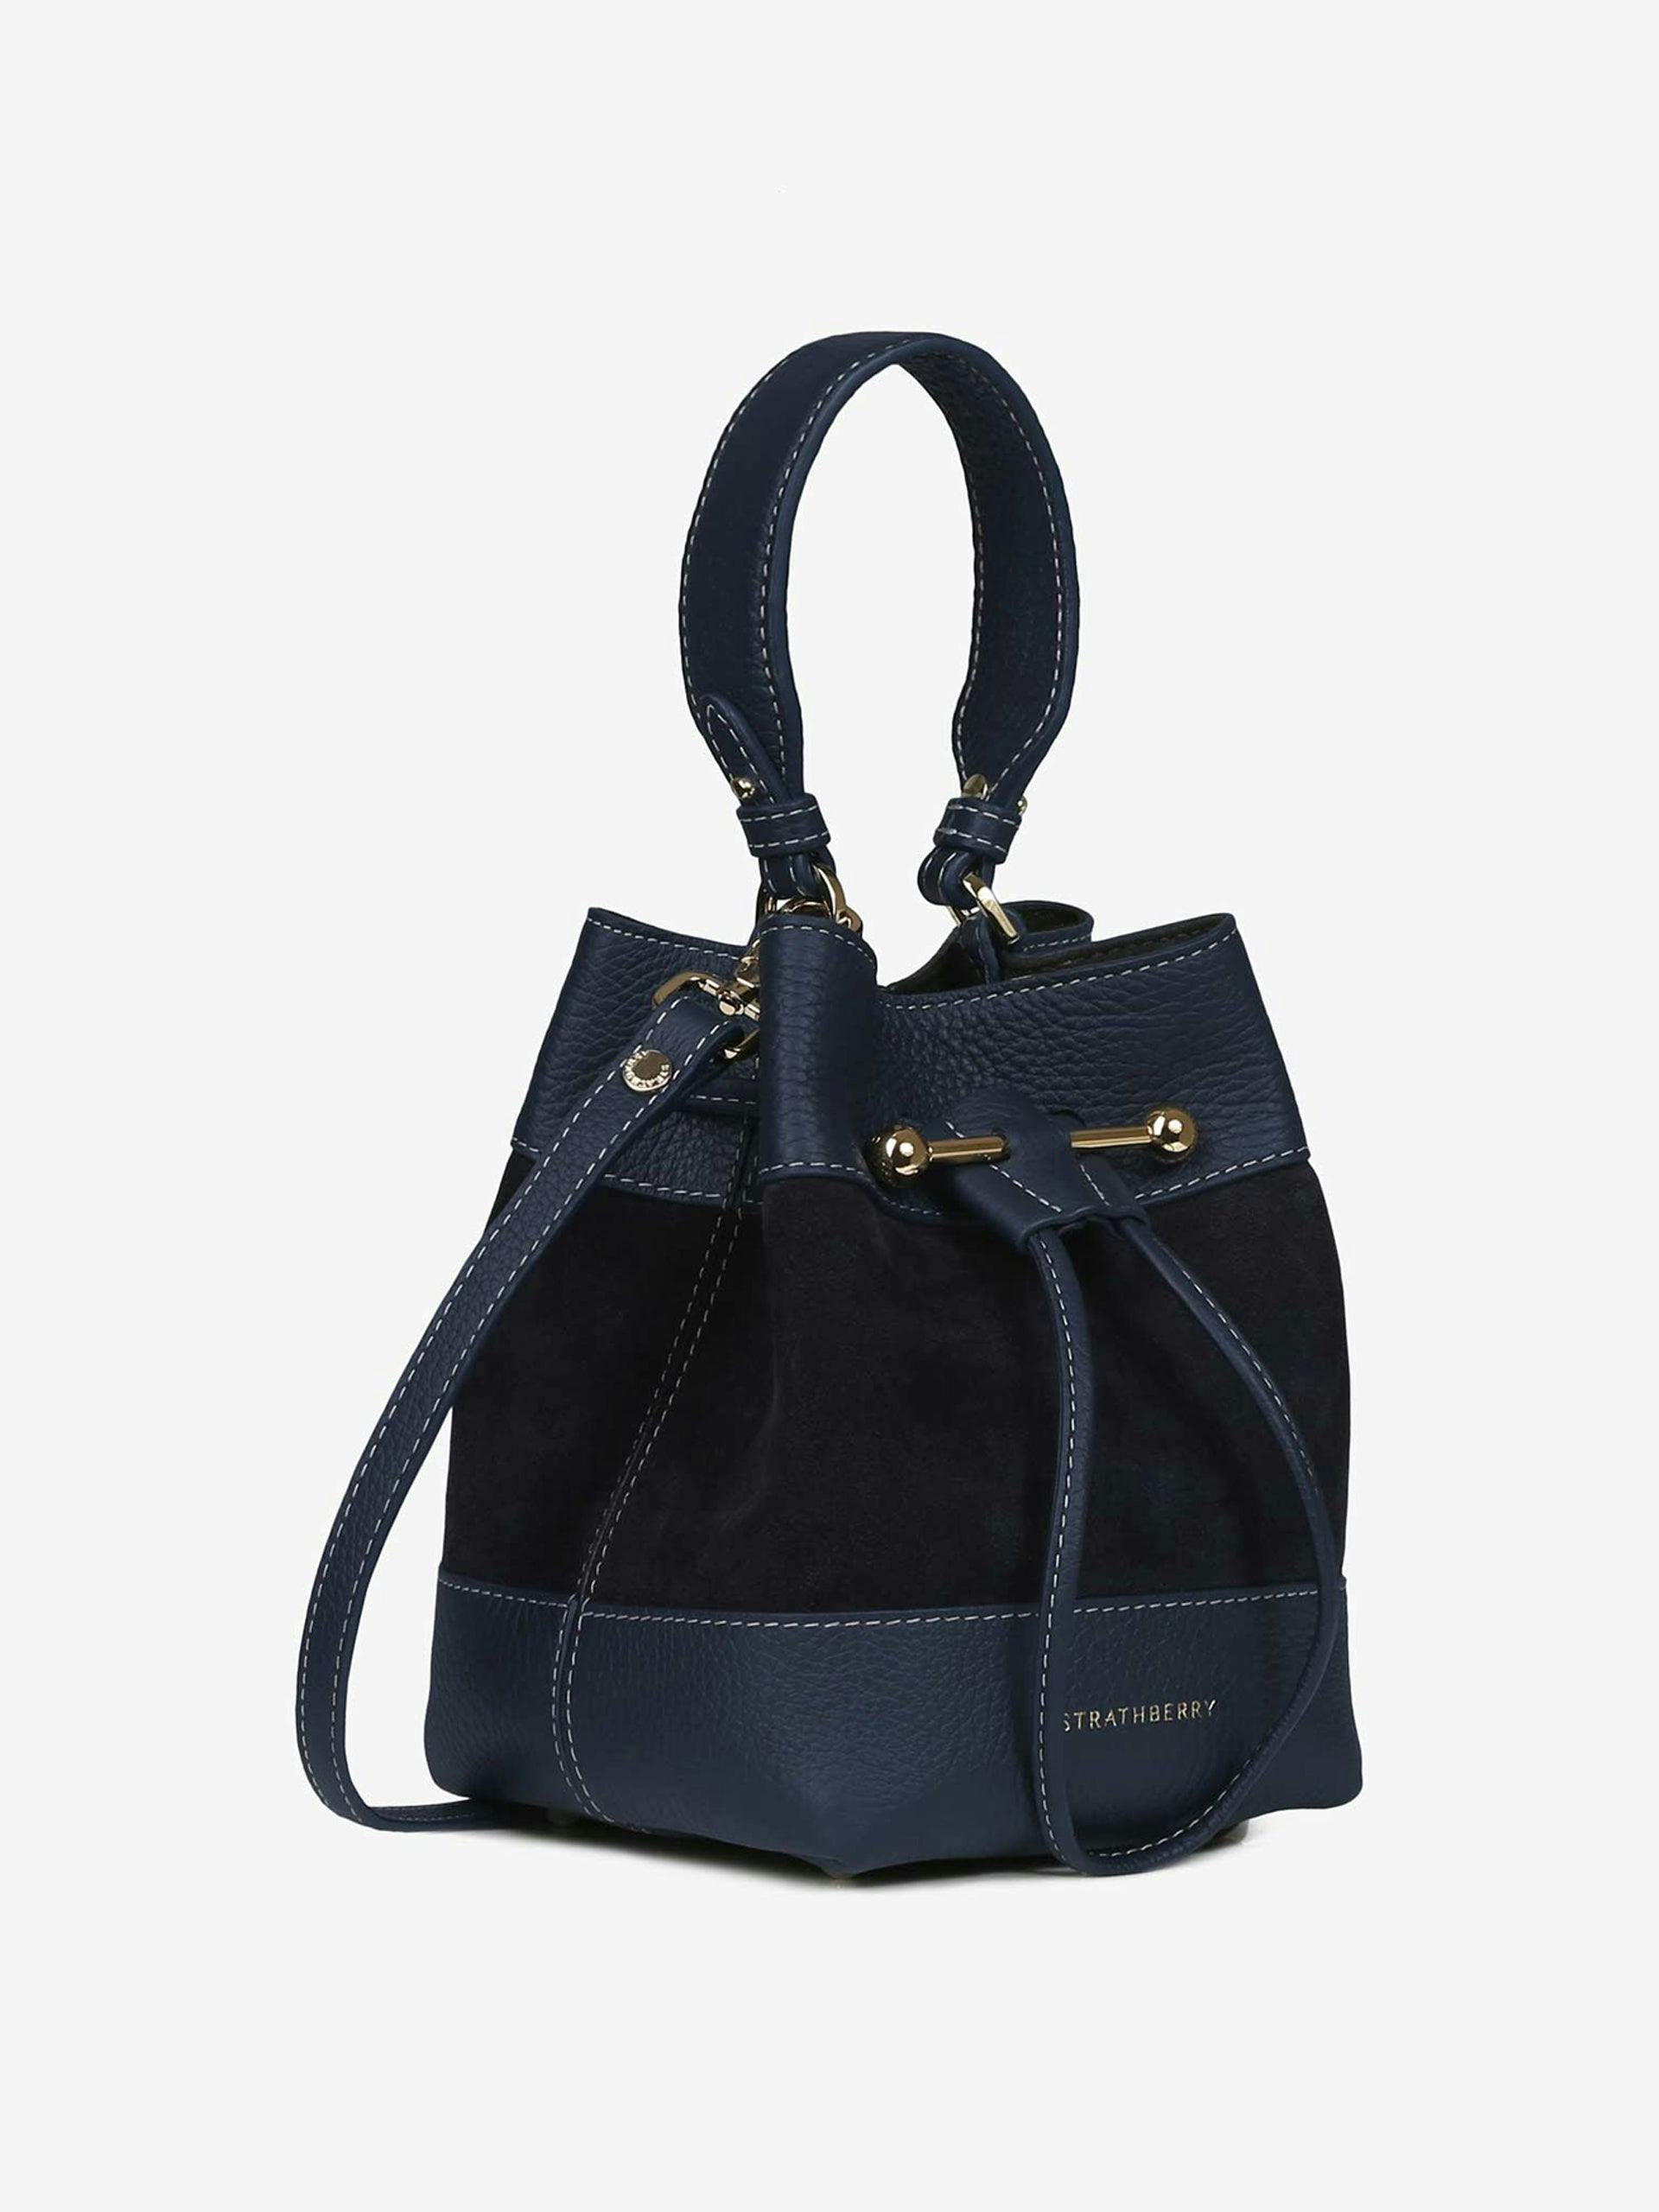 Navy Lana Osette leather and suede top handle bag